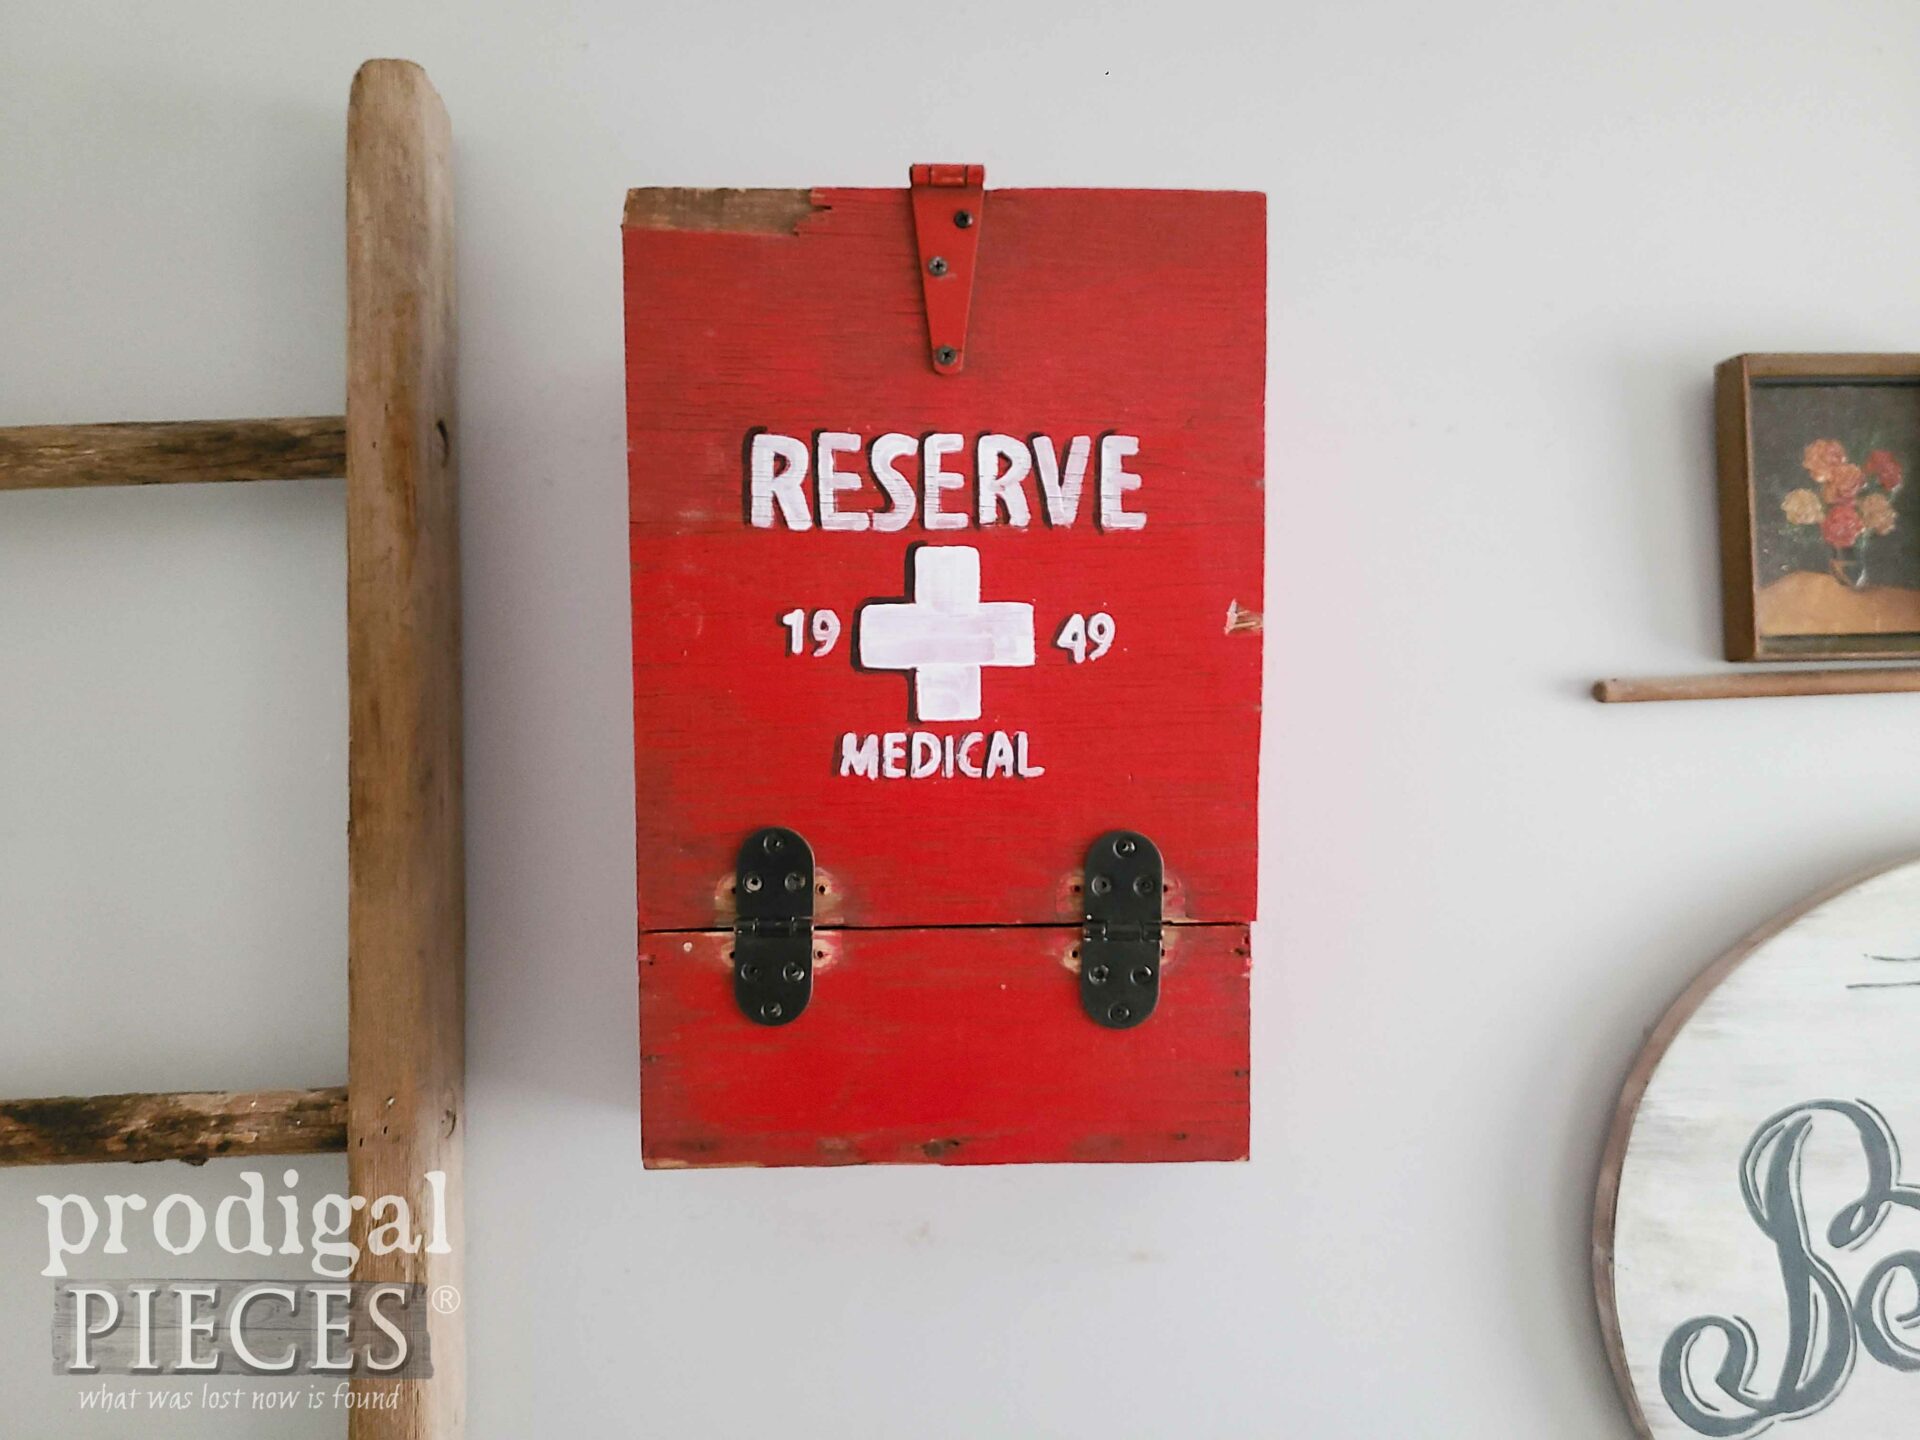 Red Cross Swiss Style Antique Medical Box for Farmhouse Decor by Larissa of Prodigal Pieces | prodigalpieces.com #prodigalpieces #antique #farmhouse #diy